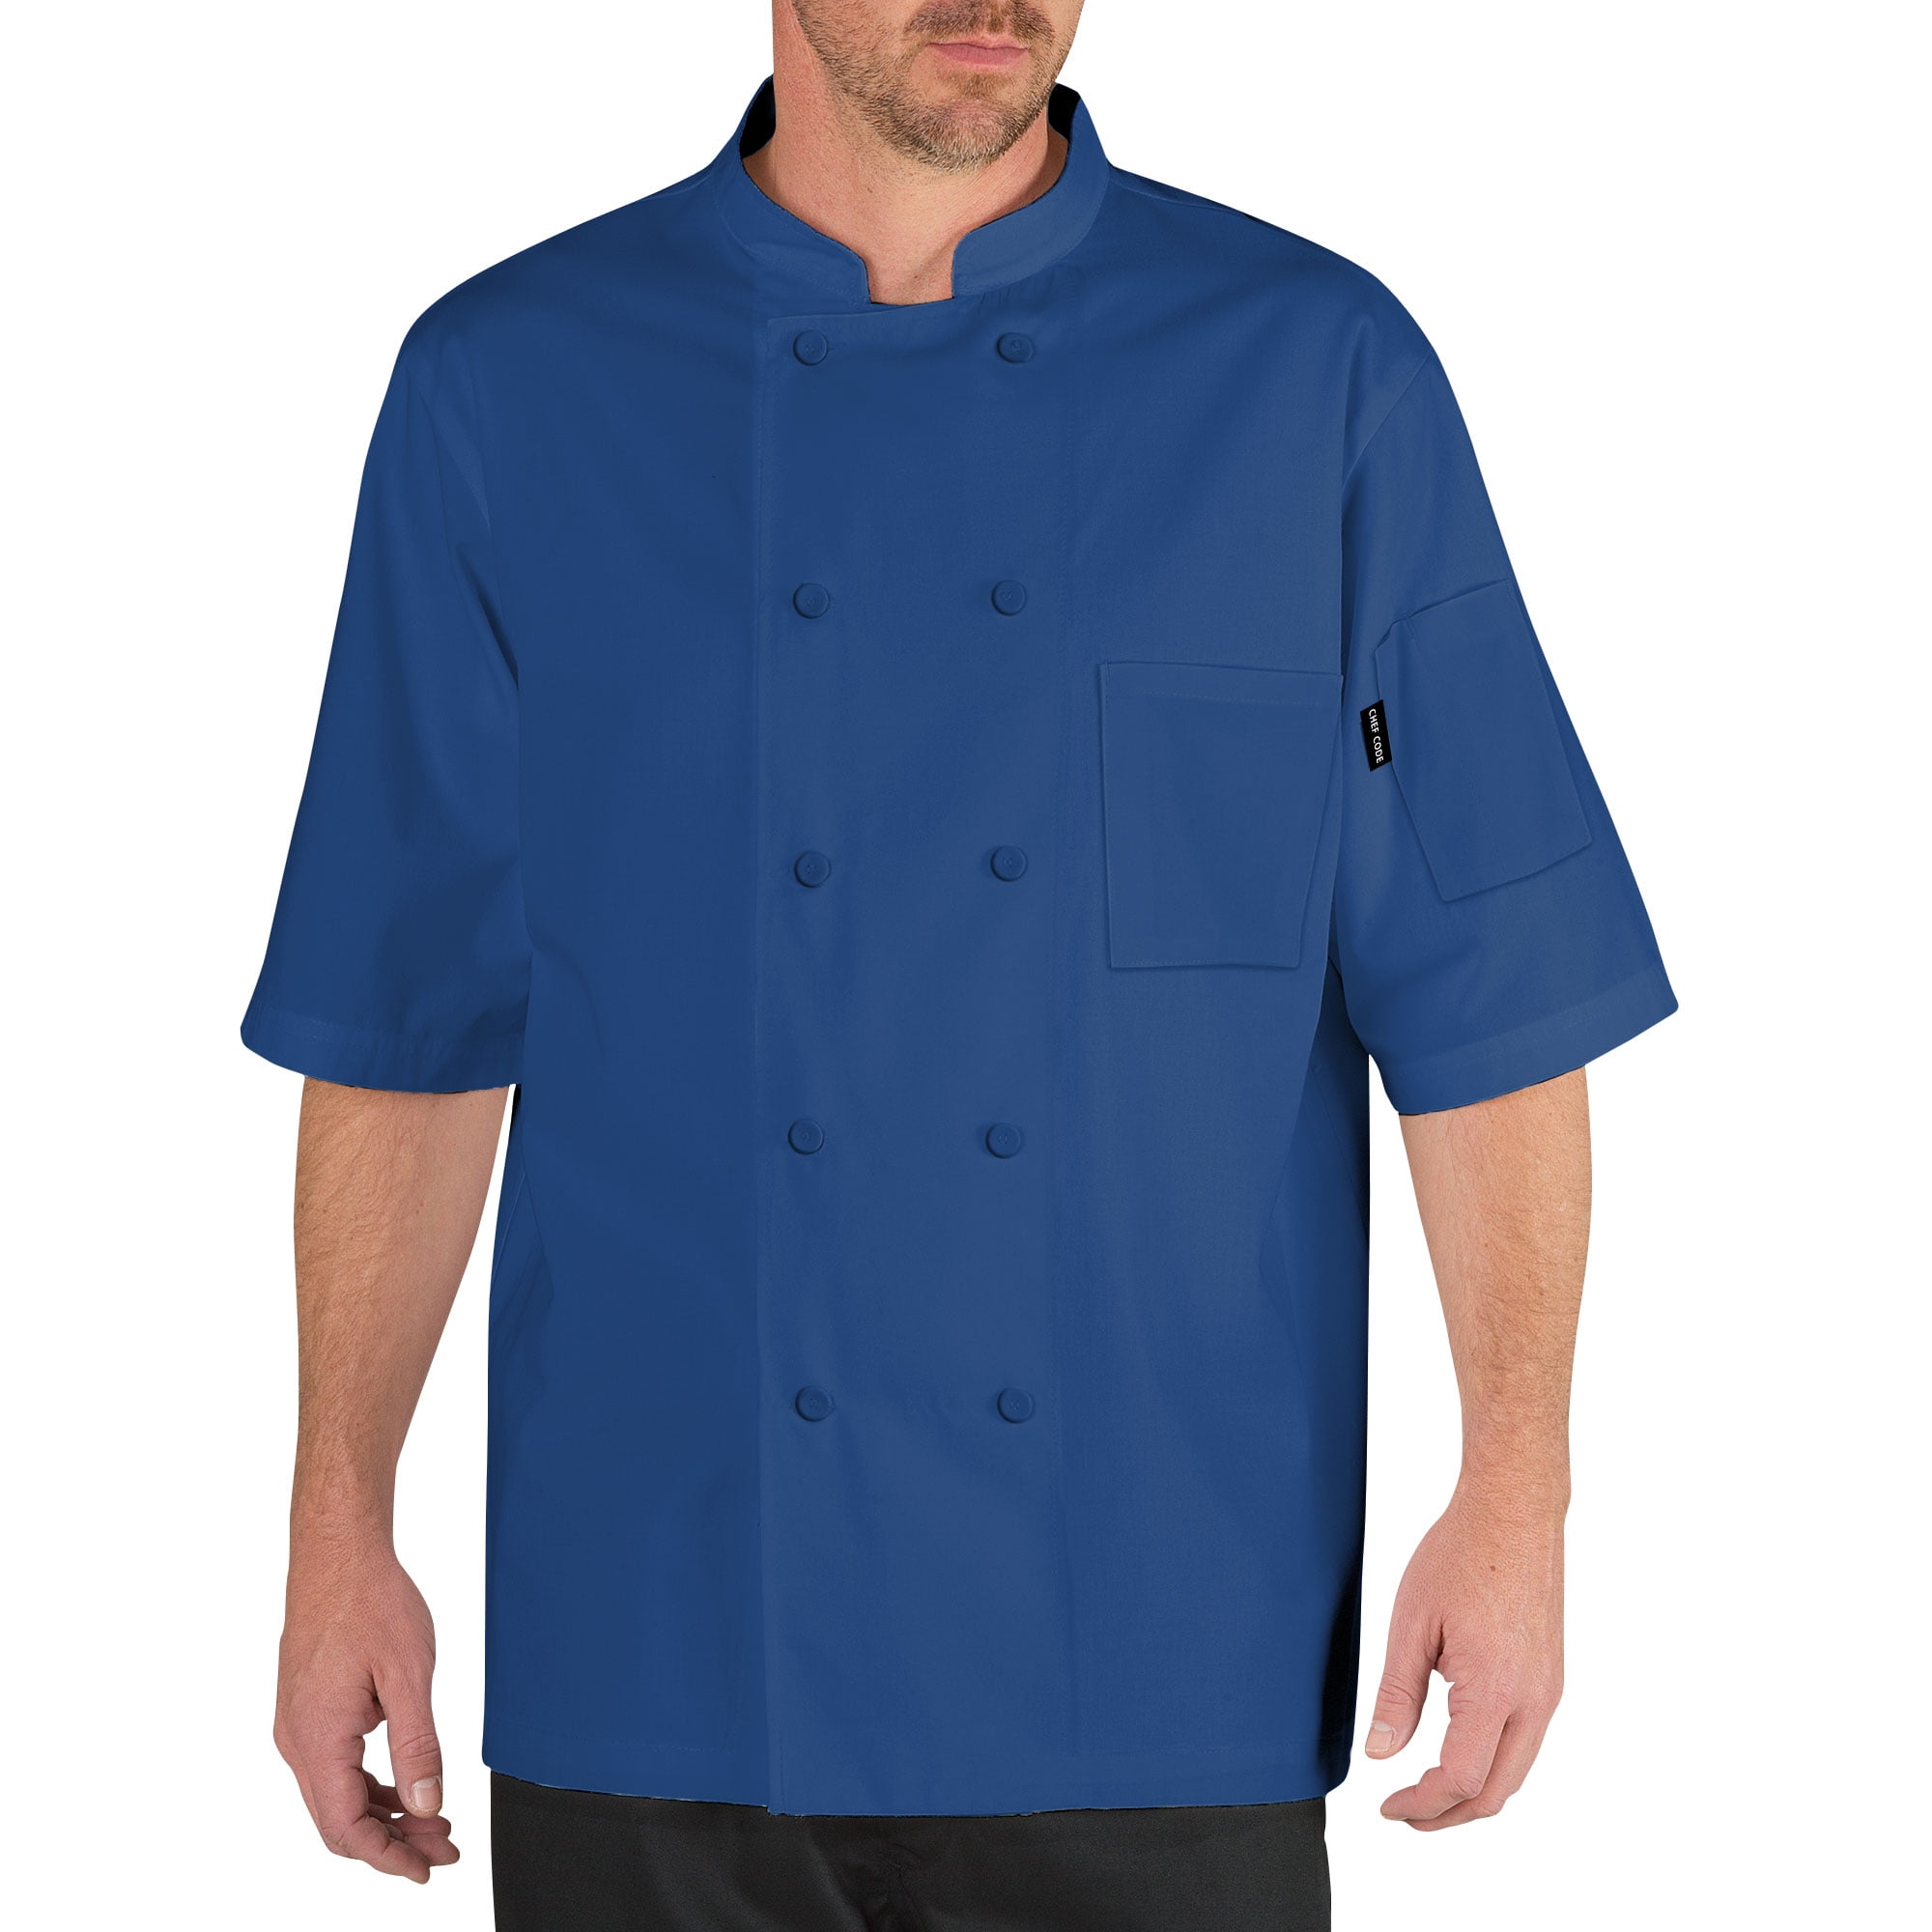 PRESS STUD BUTTONS,HALF SLEEVE NEW INS07 CLOTHING/APRONS UNISEX CHEFS JACKET 